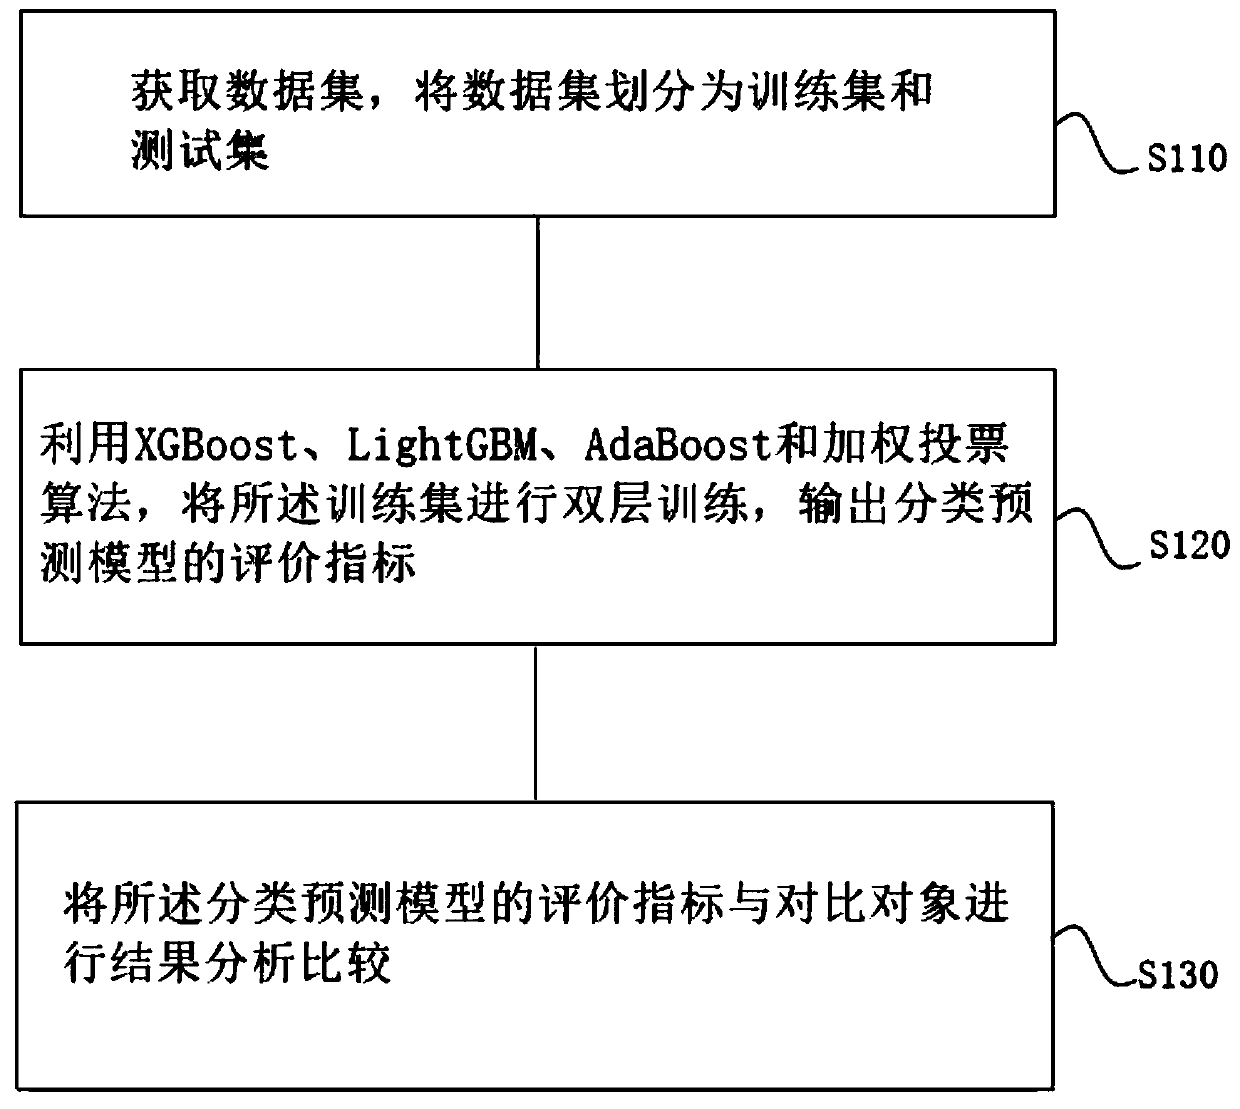 Enterprise information loss prediction method of double-layer structure